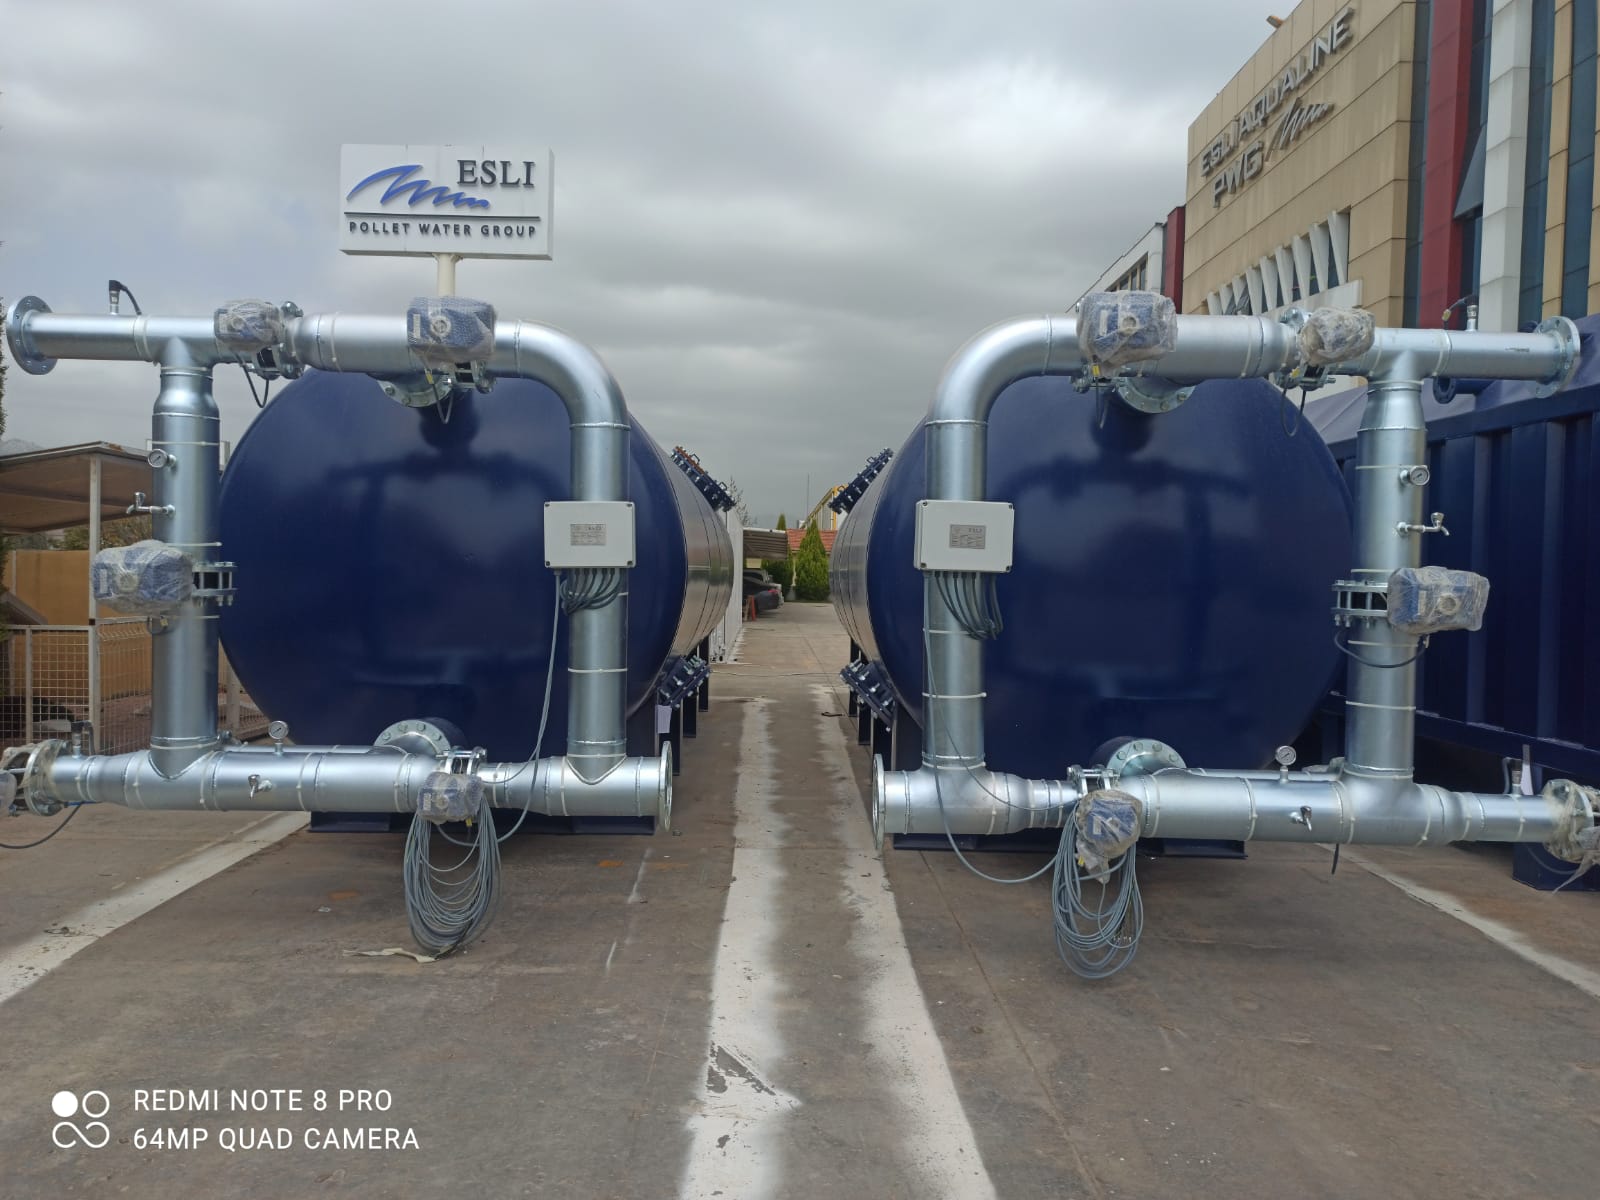 Lamella Clarifier by Esli Pollet Water Group Based on physical and chemical treatment. Two standard systems having capacity of 50 m3/h and 100 m...